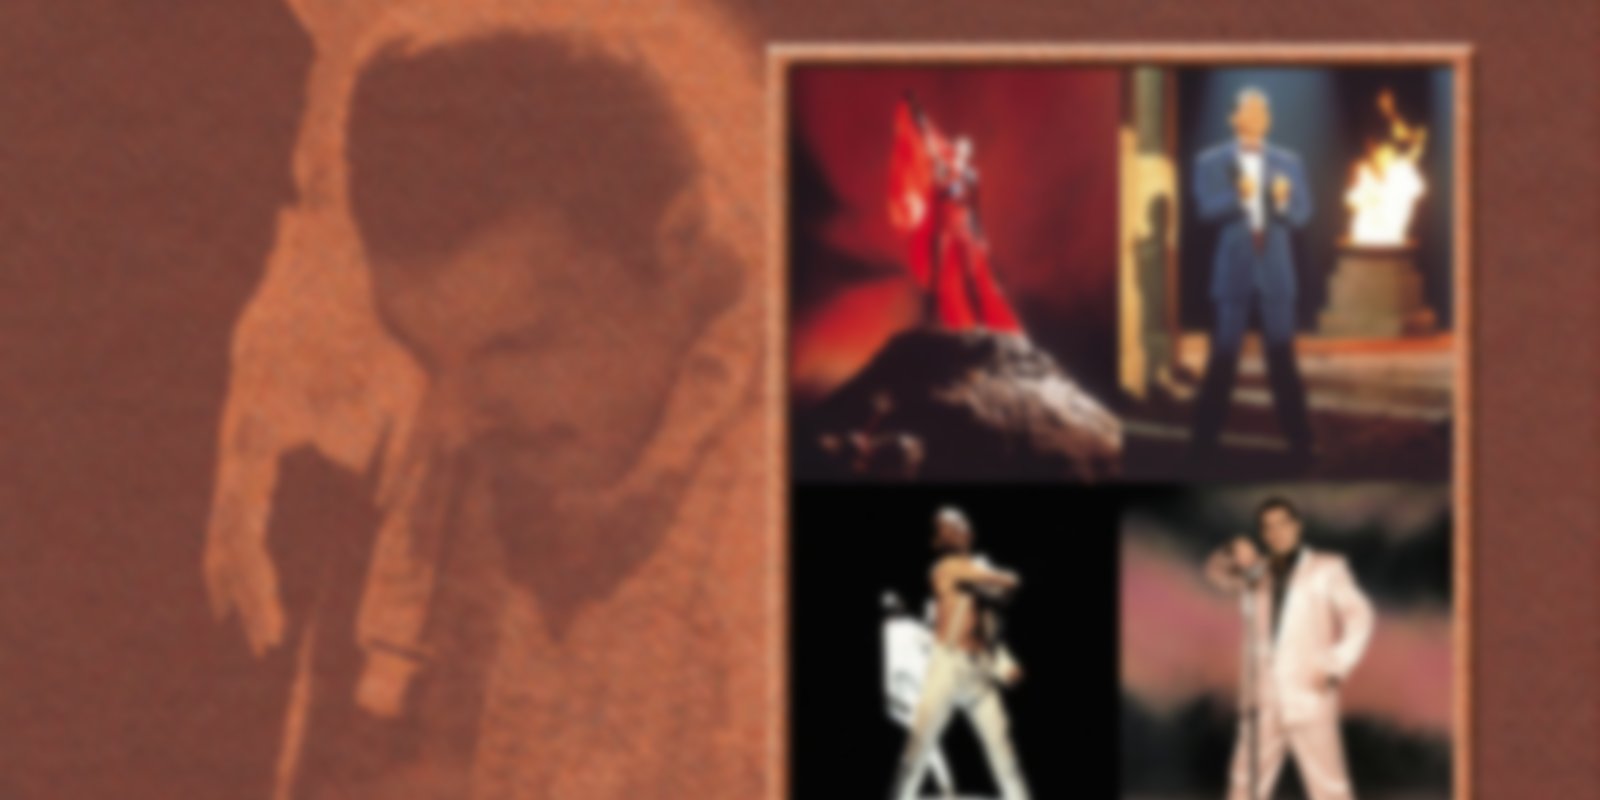 Freddie Mercury - The Video Collection